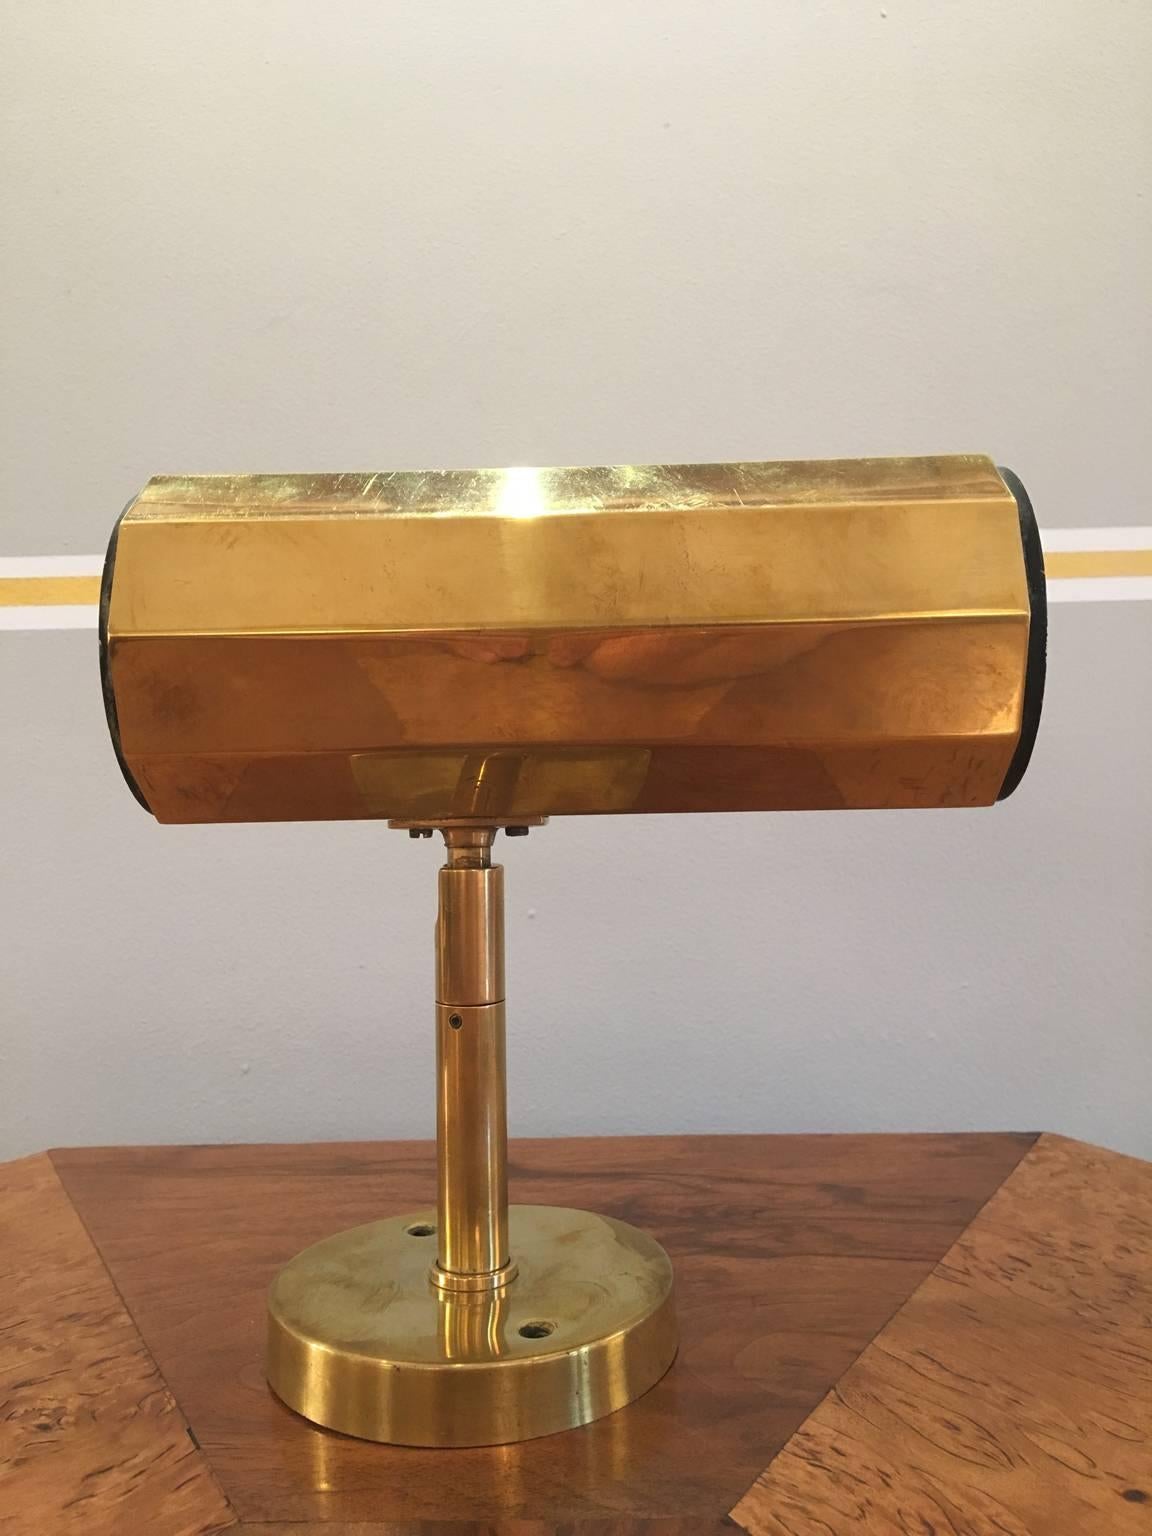 20th Century Pair of Brass Wall Lights (or Ceiling Lights) by Koch and Lowy